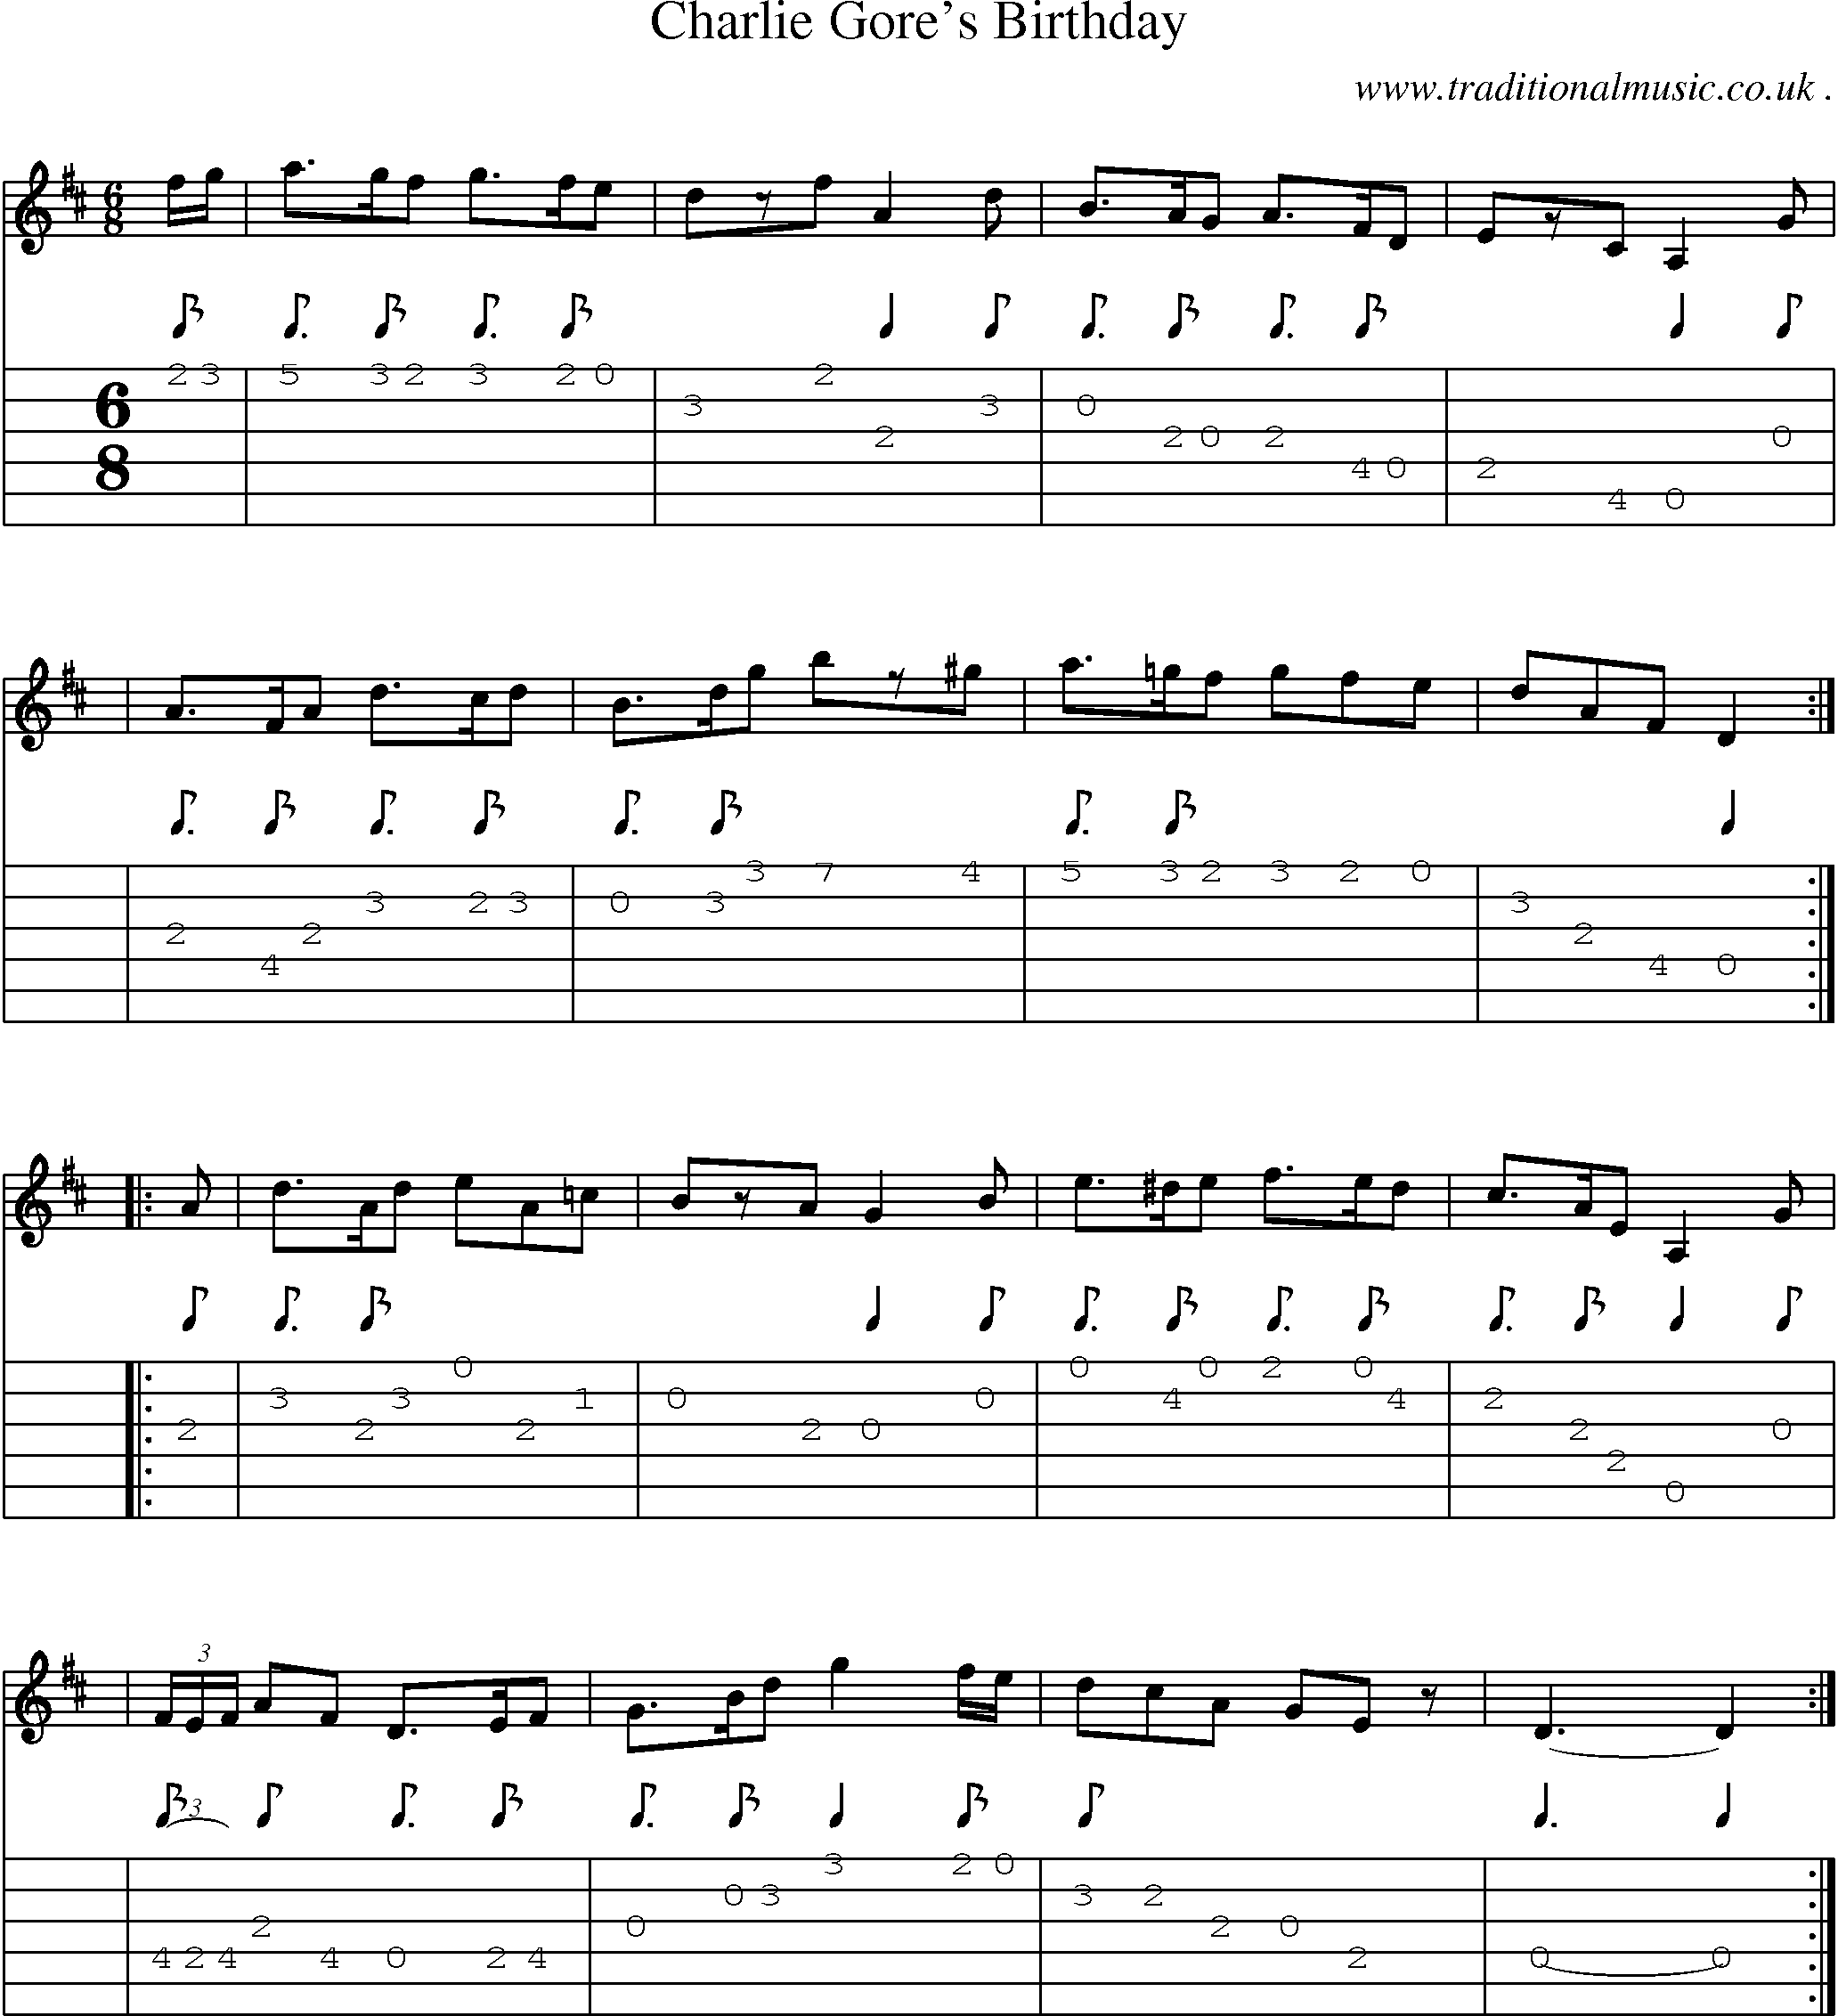 Sheet-music  score, Chords and Guitar Tabs for Charlie Gores Birthday